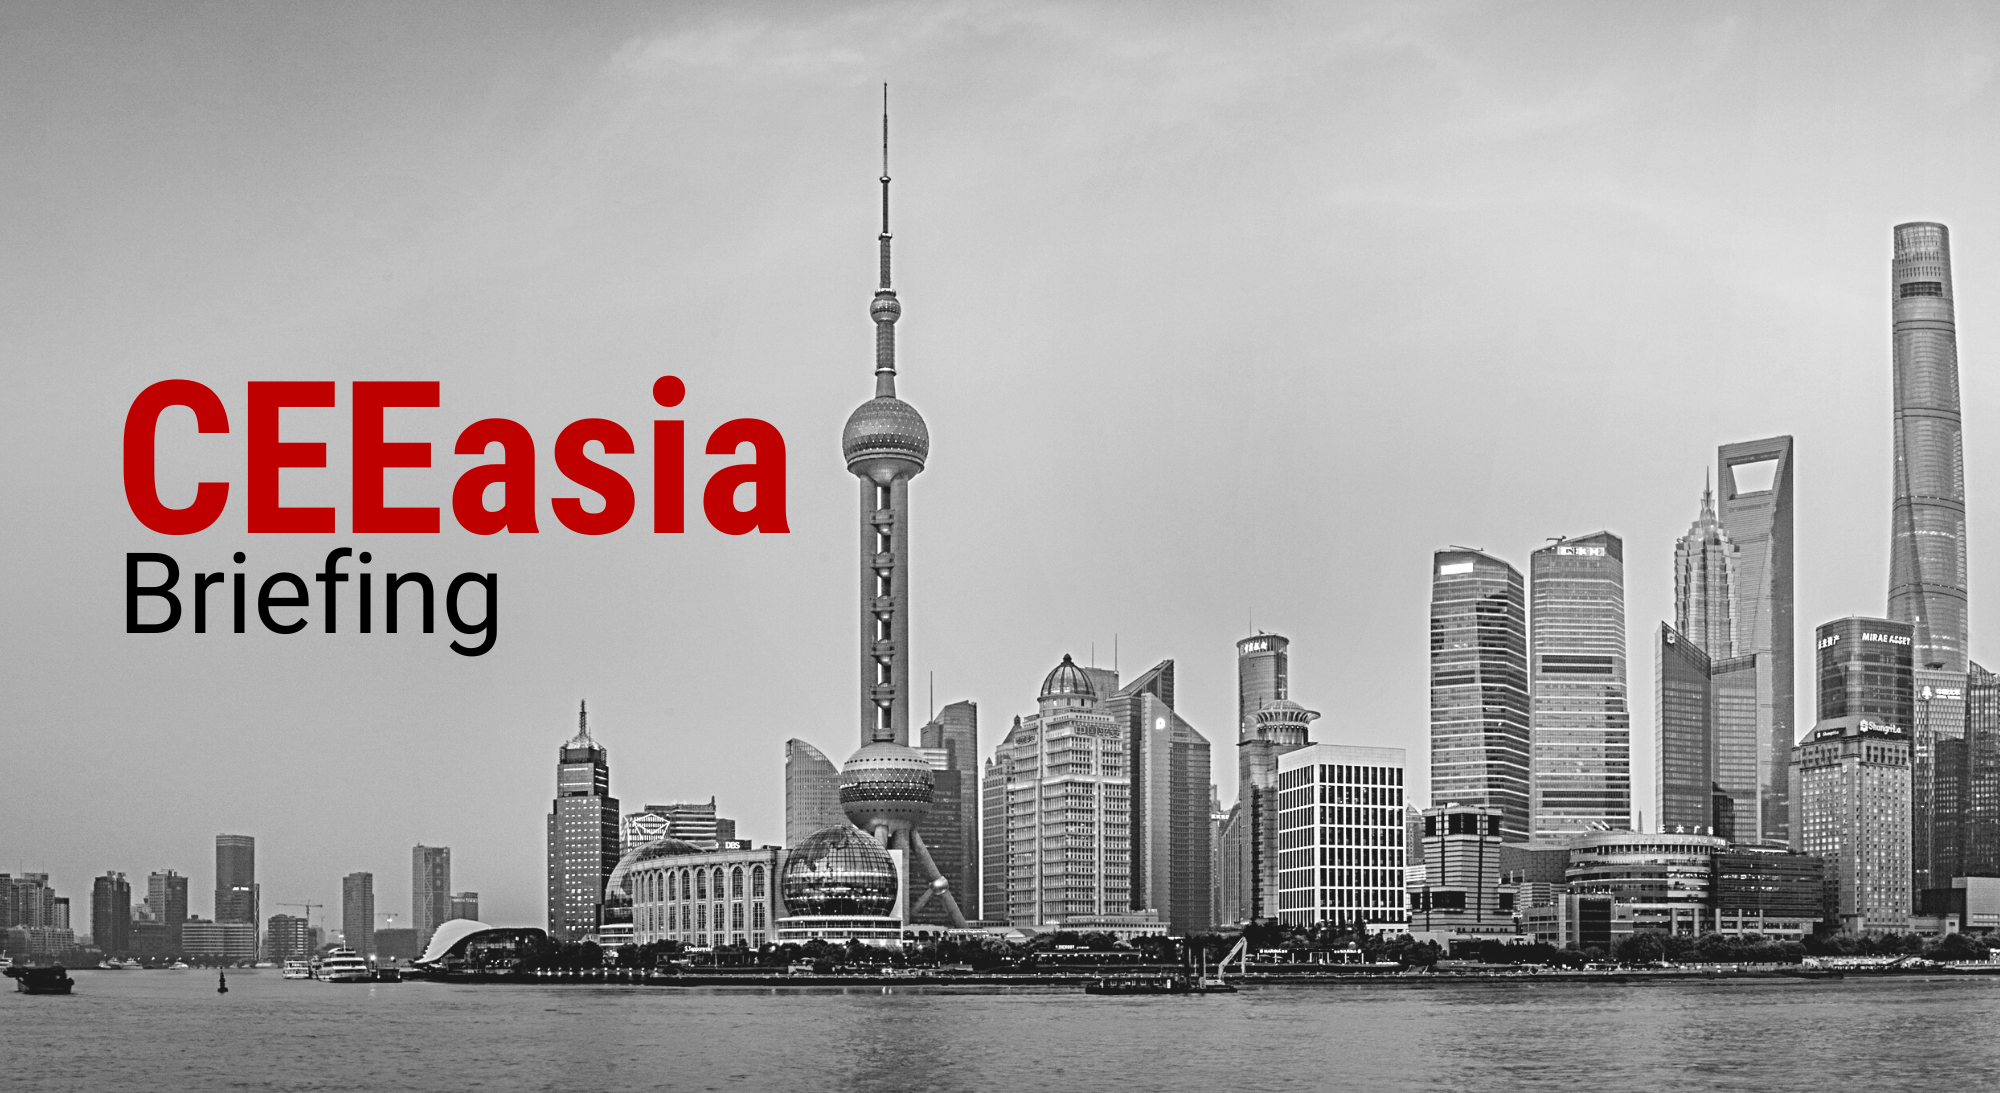 CEEasia Briefing #36: China, South Korea, and Germany invest into Hungary’s, Škoda’s withdraw from China, The Taiwanese-Slovak Commission on Economic Cooperation, EU-ASEAN summit